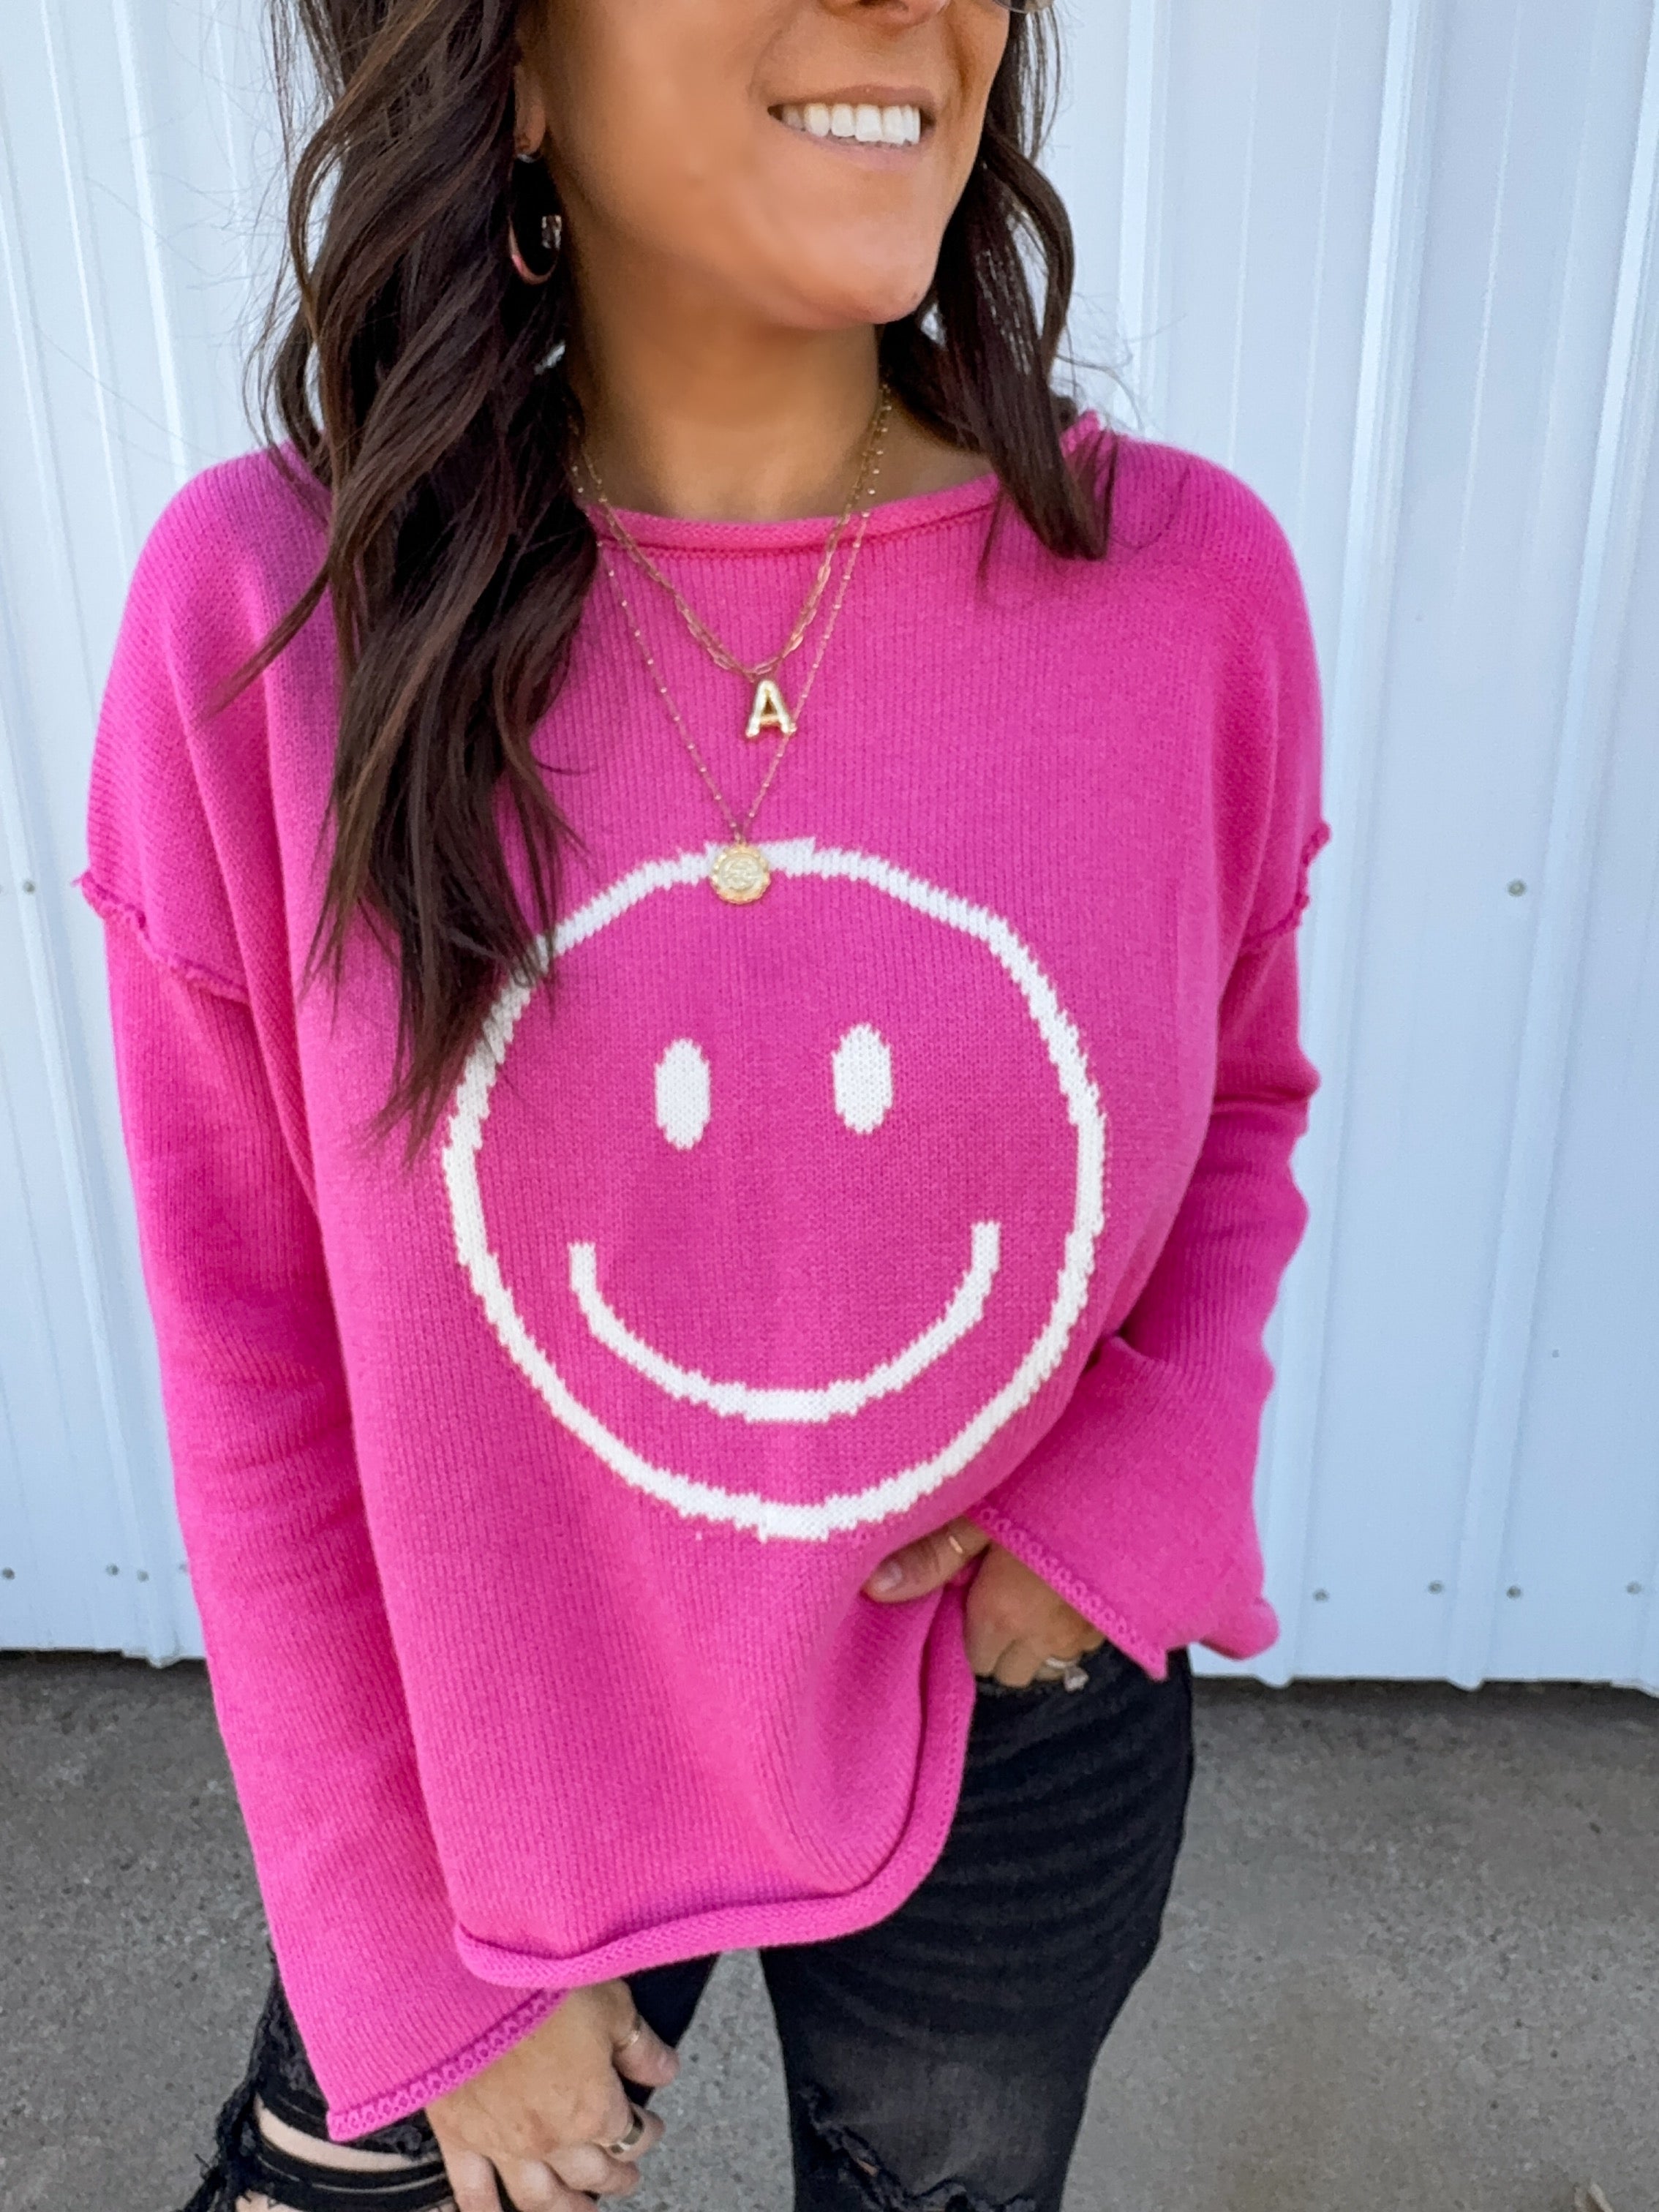 Where Were You Hot Pink Smiley Sweater